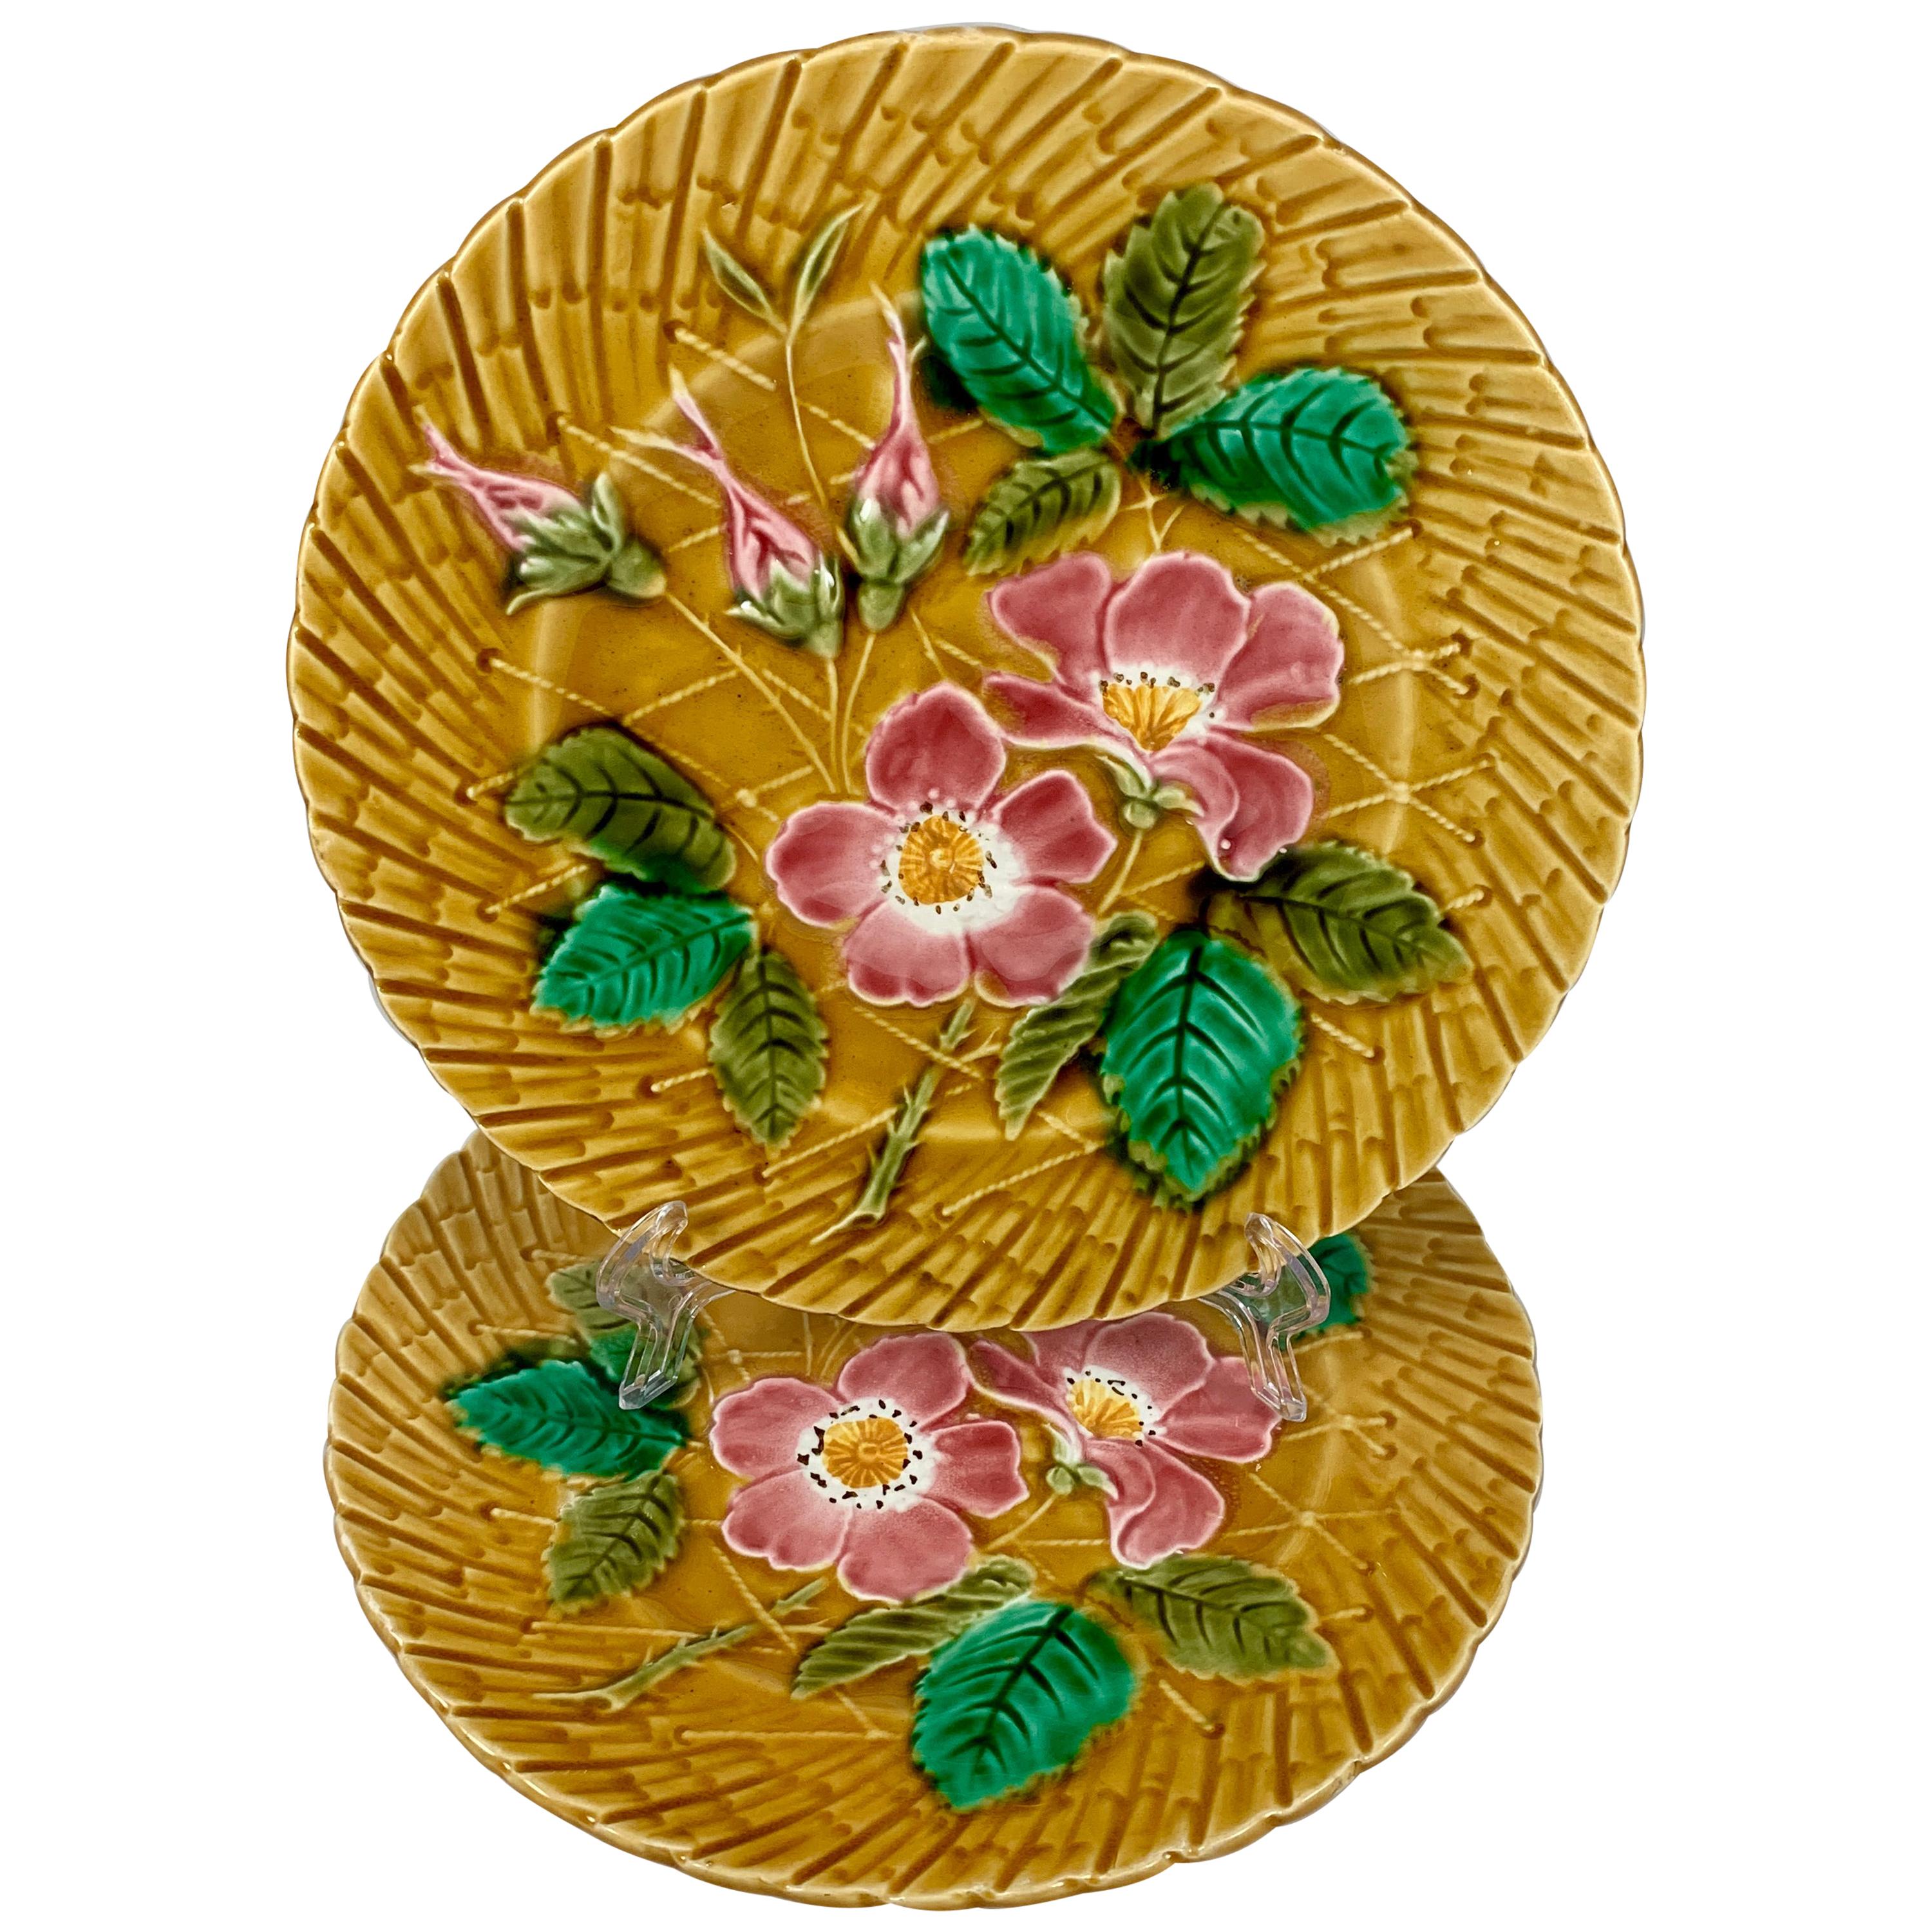 Sarreguemines Wild Roses Mustard Yellow French Faïence Majolica Plate